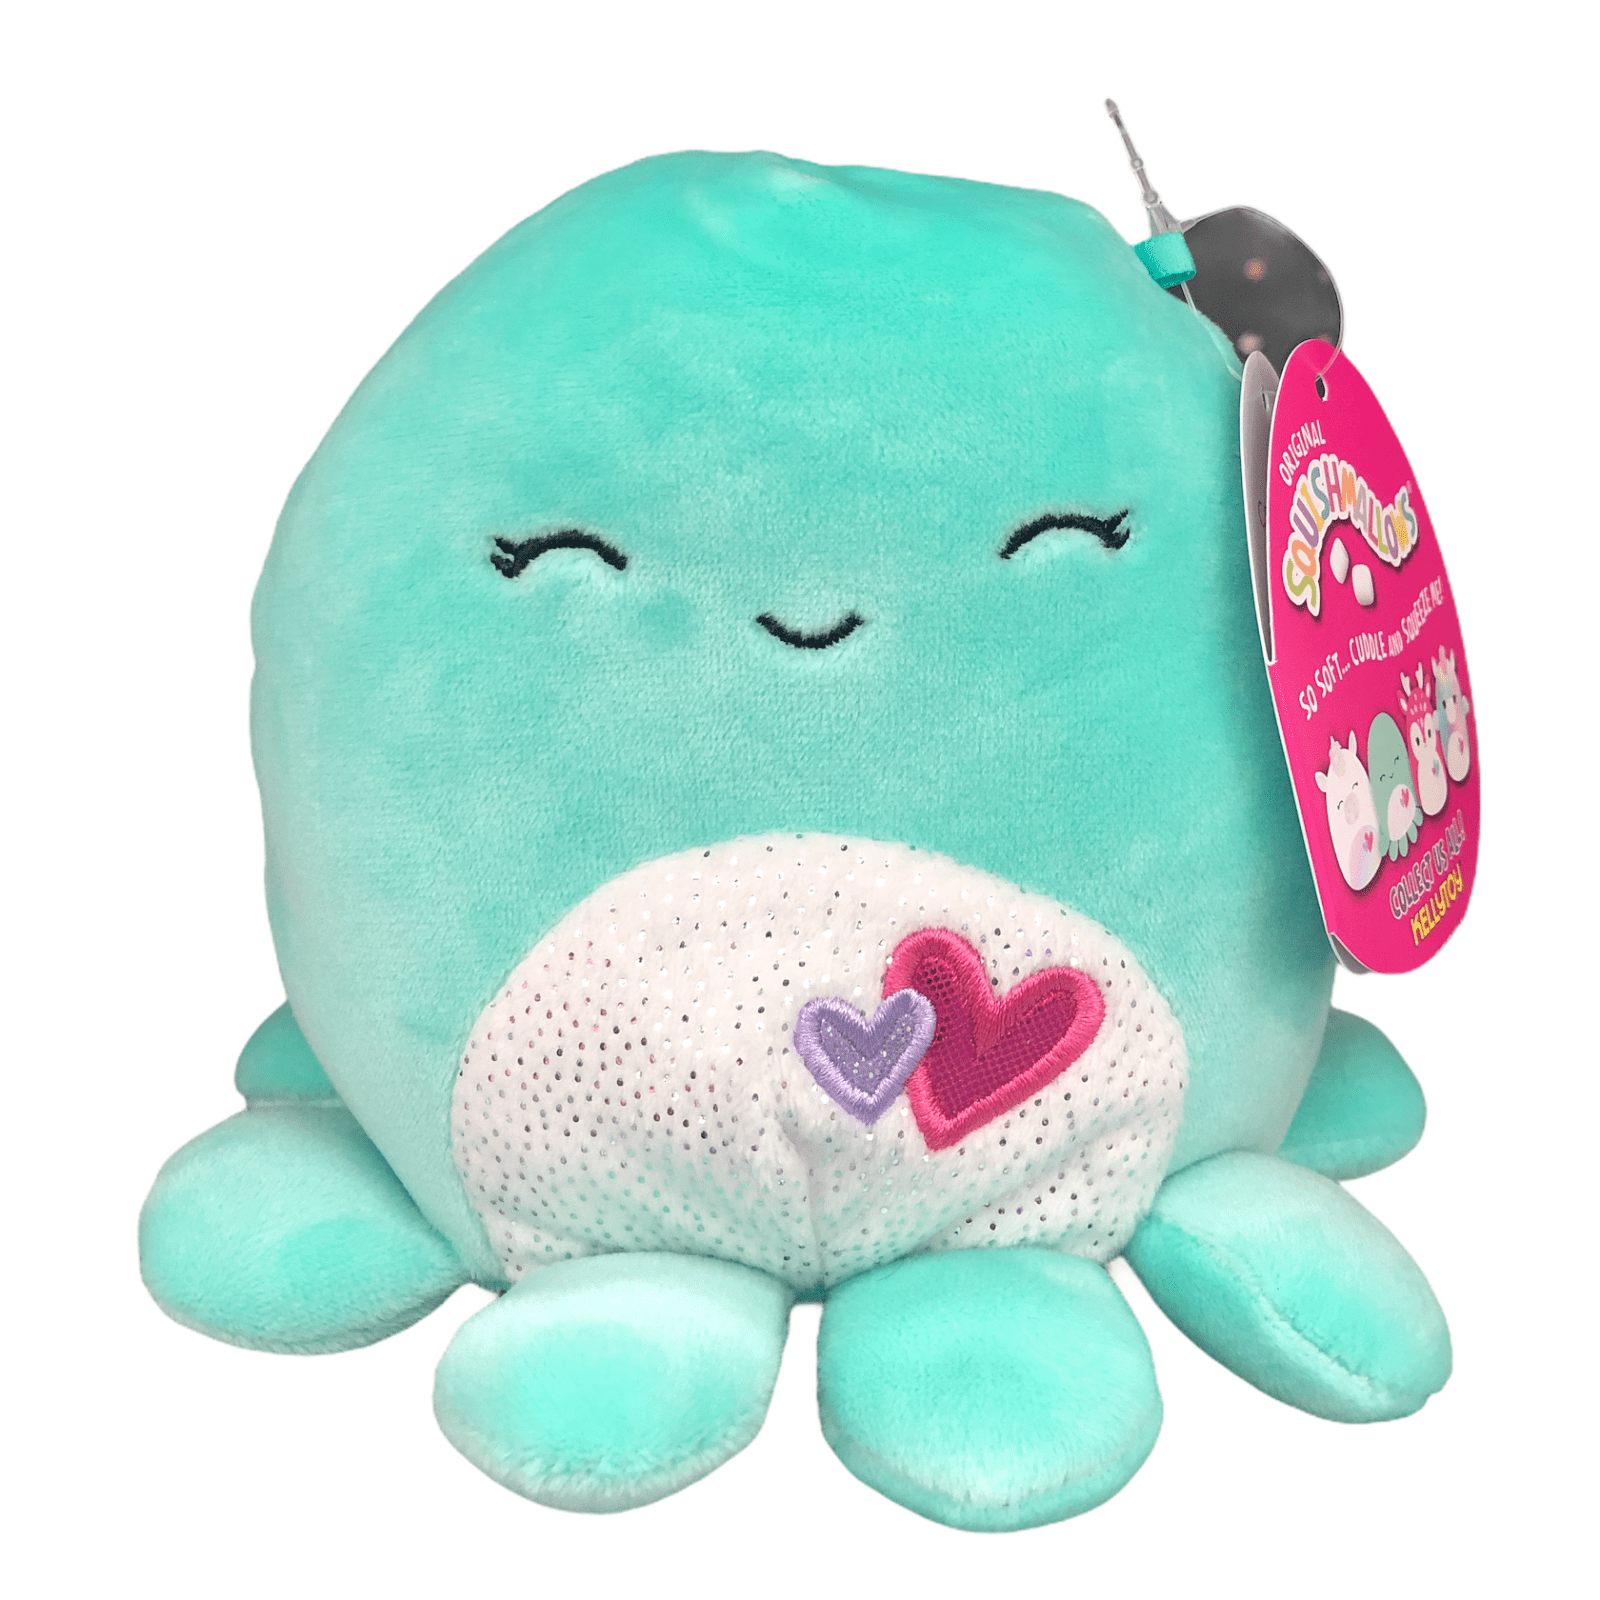 Squishmallows Olina Octopus 5 inch Plush Toy for sale online